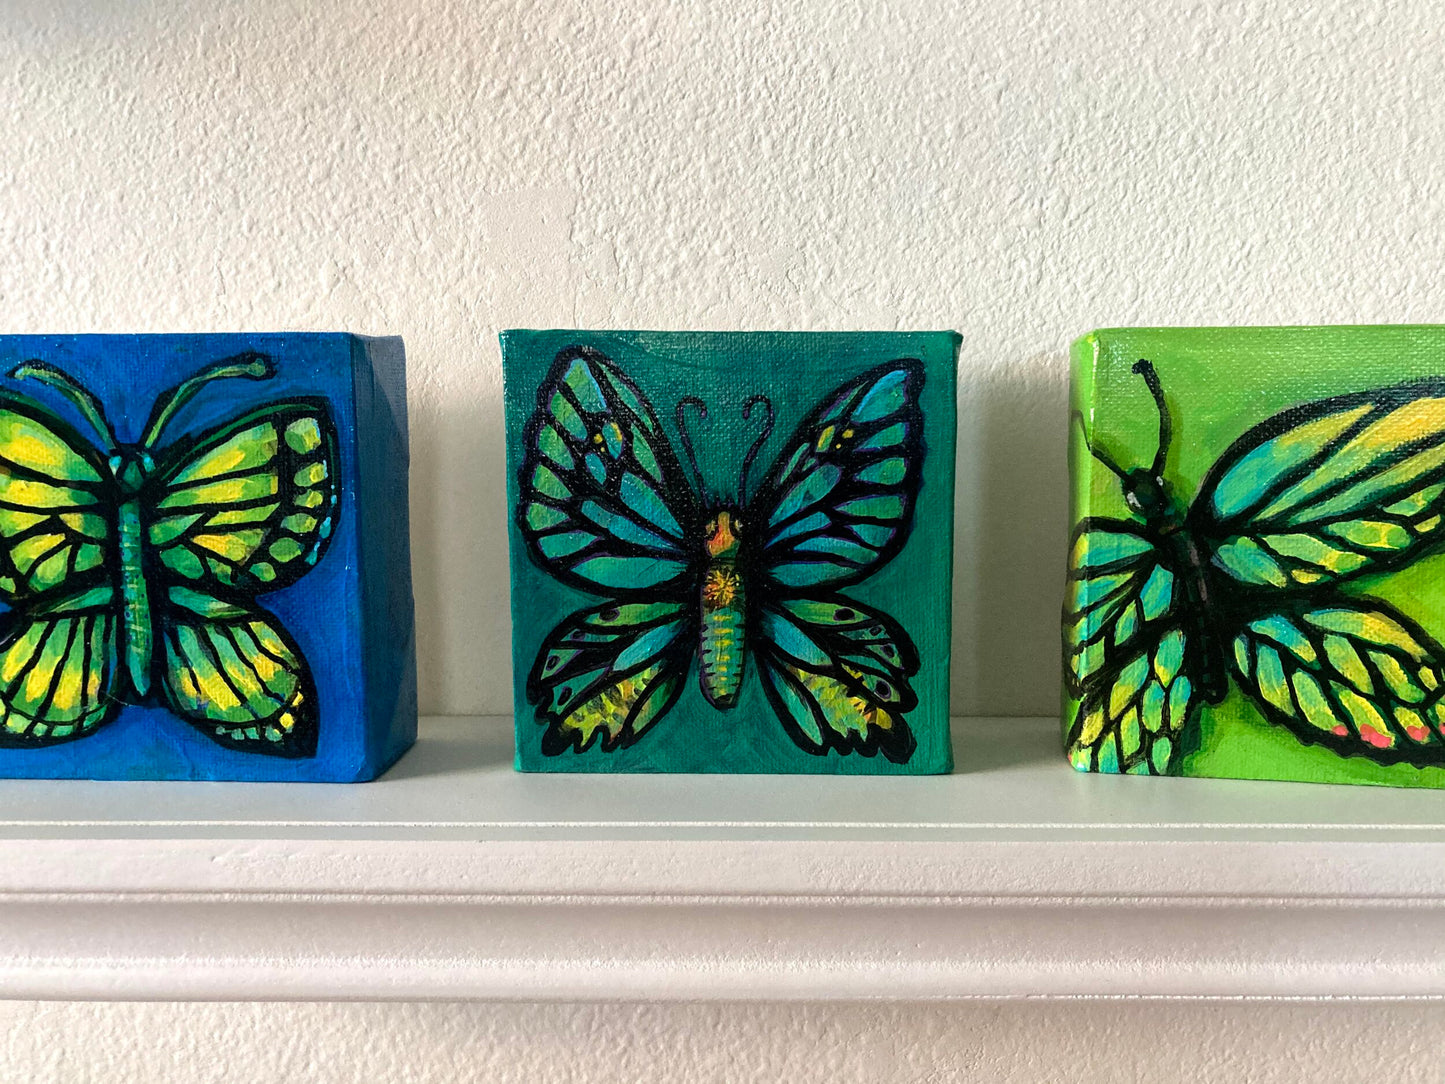 Mini Butterfly on Teal (original)